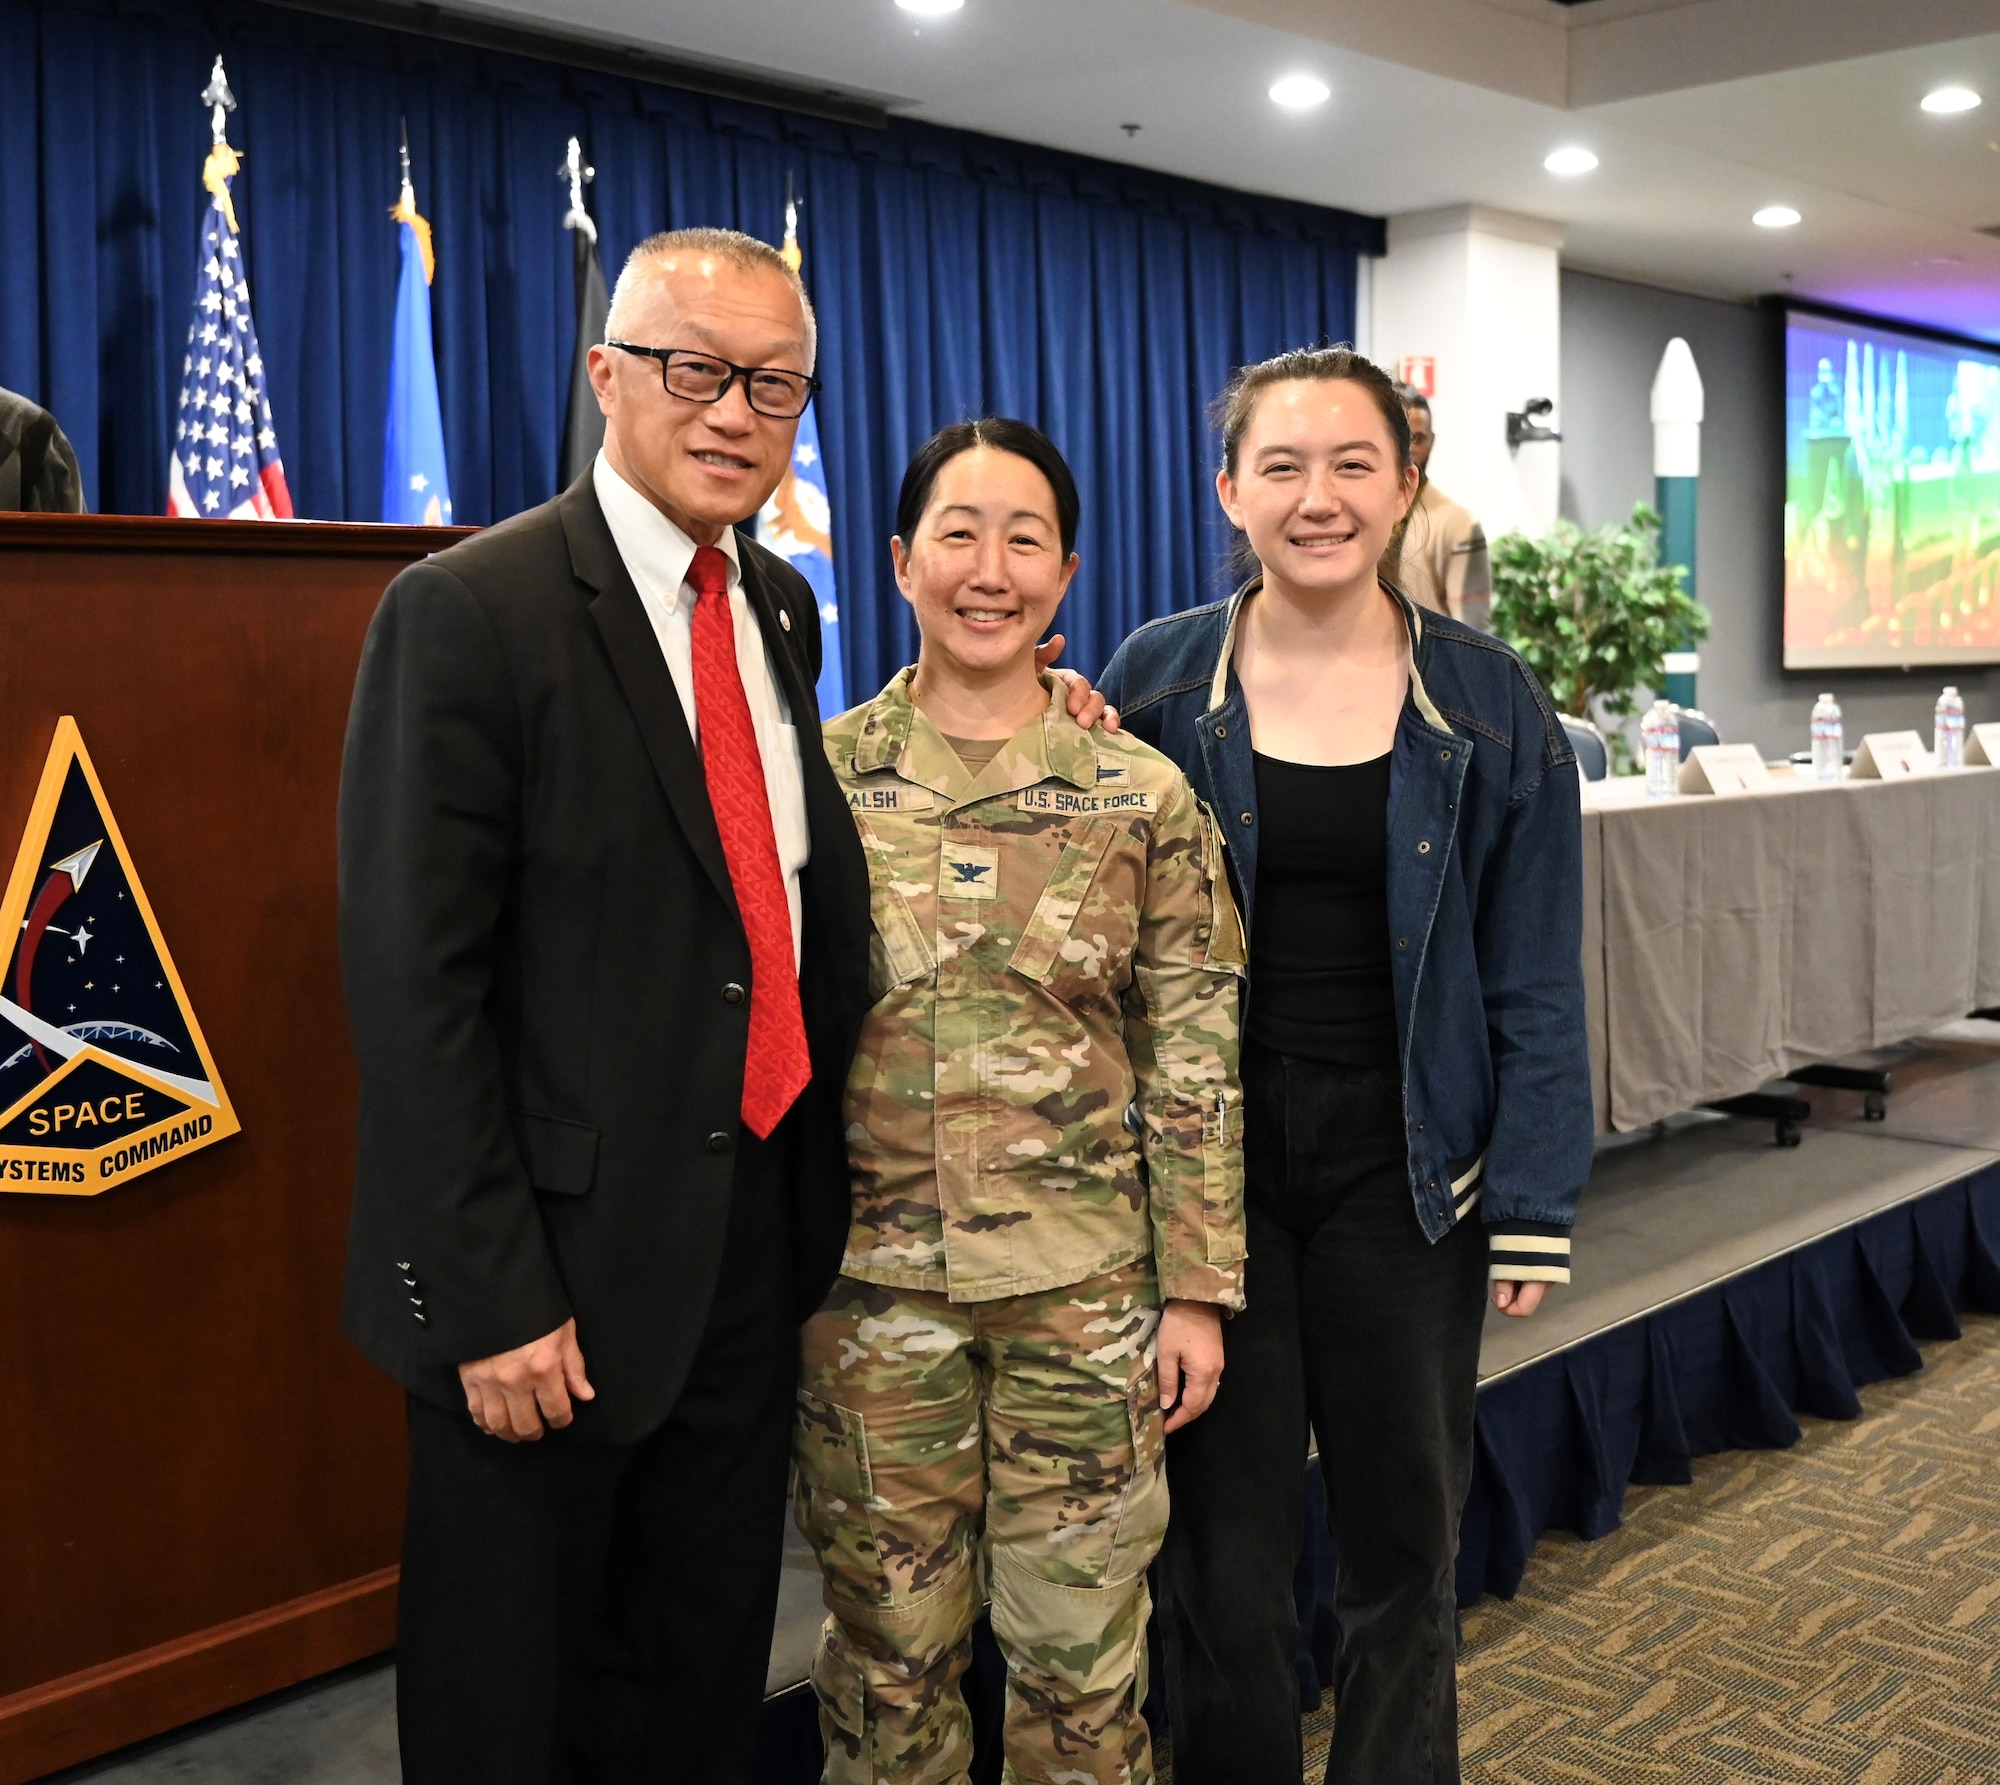 Standing center in the photo is Space Base Delta 3 Commander, Colonel Mia Walsh at Los Angeles Air Force Base’s Women In Leadership Panel with Mayor George Chen, City of Torrance on the left. Her daughter, Taylor Walsh, is pictured on the right.